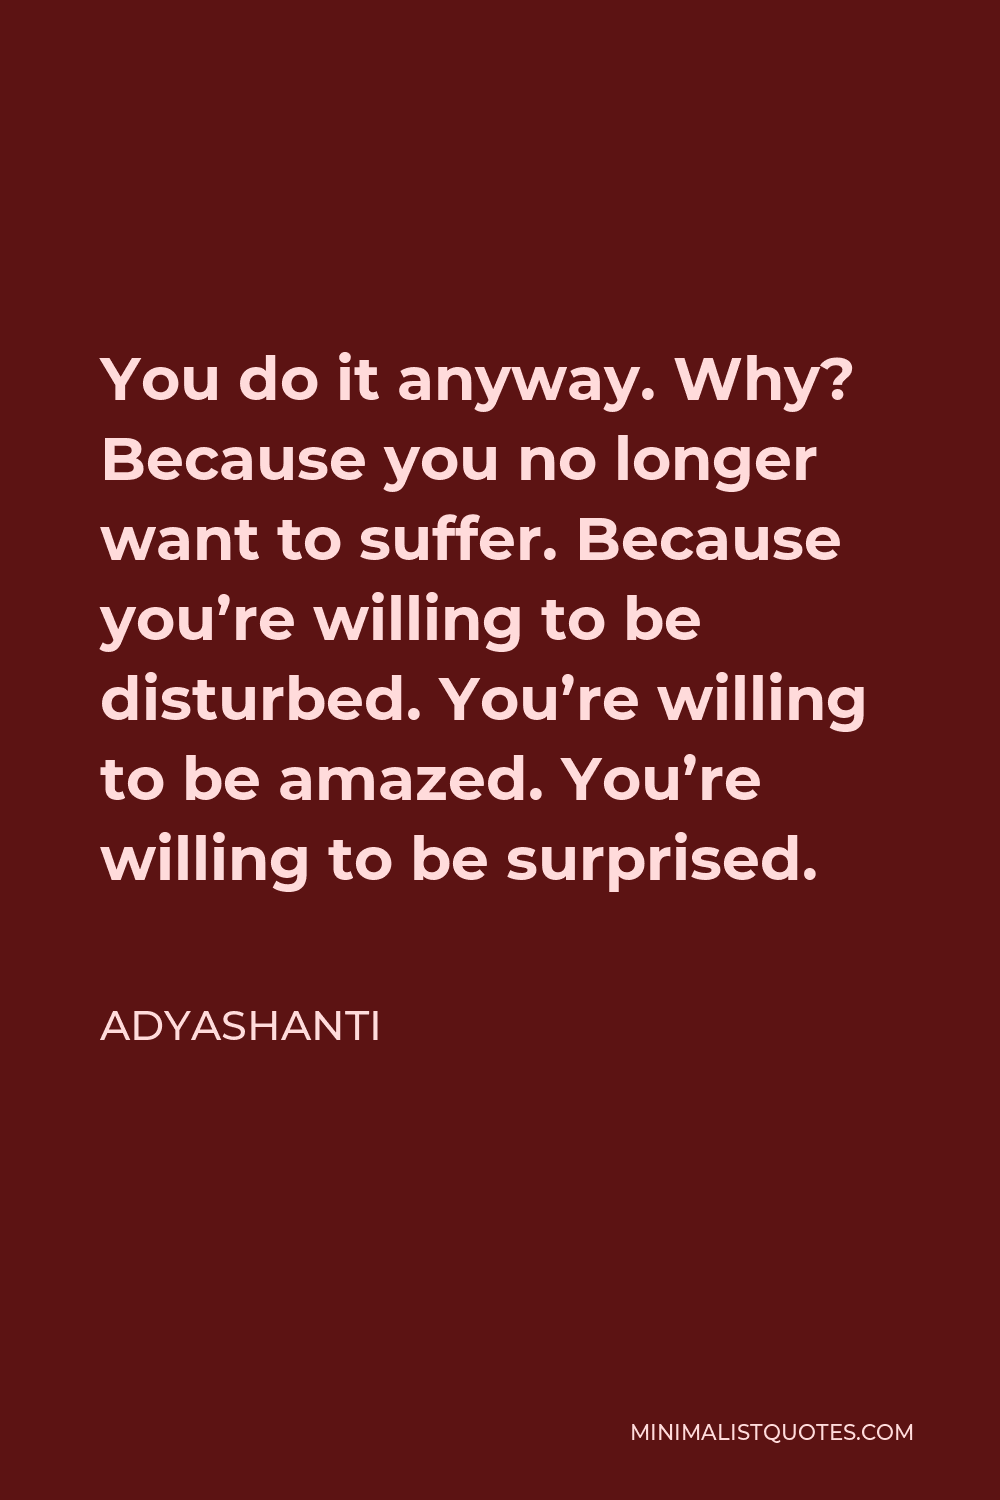 Adyashanti Quote - You do it anyway. Why? Because you no longer want to suffer. Because you’re willing to be disturbed. You’re willing to be amazed. You’re willing to be surprised.